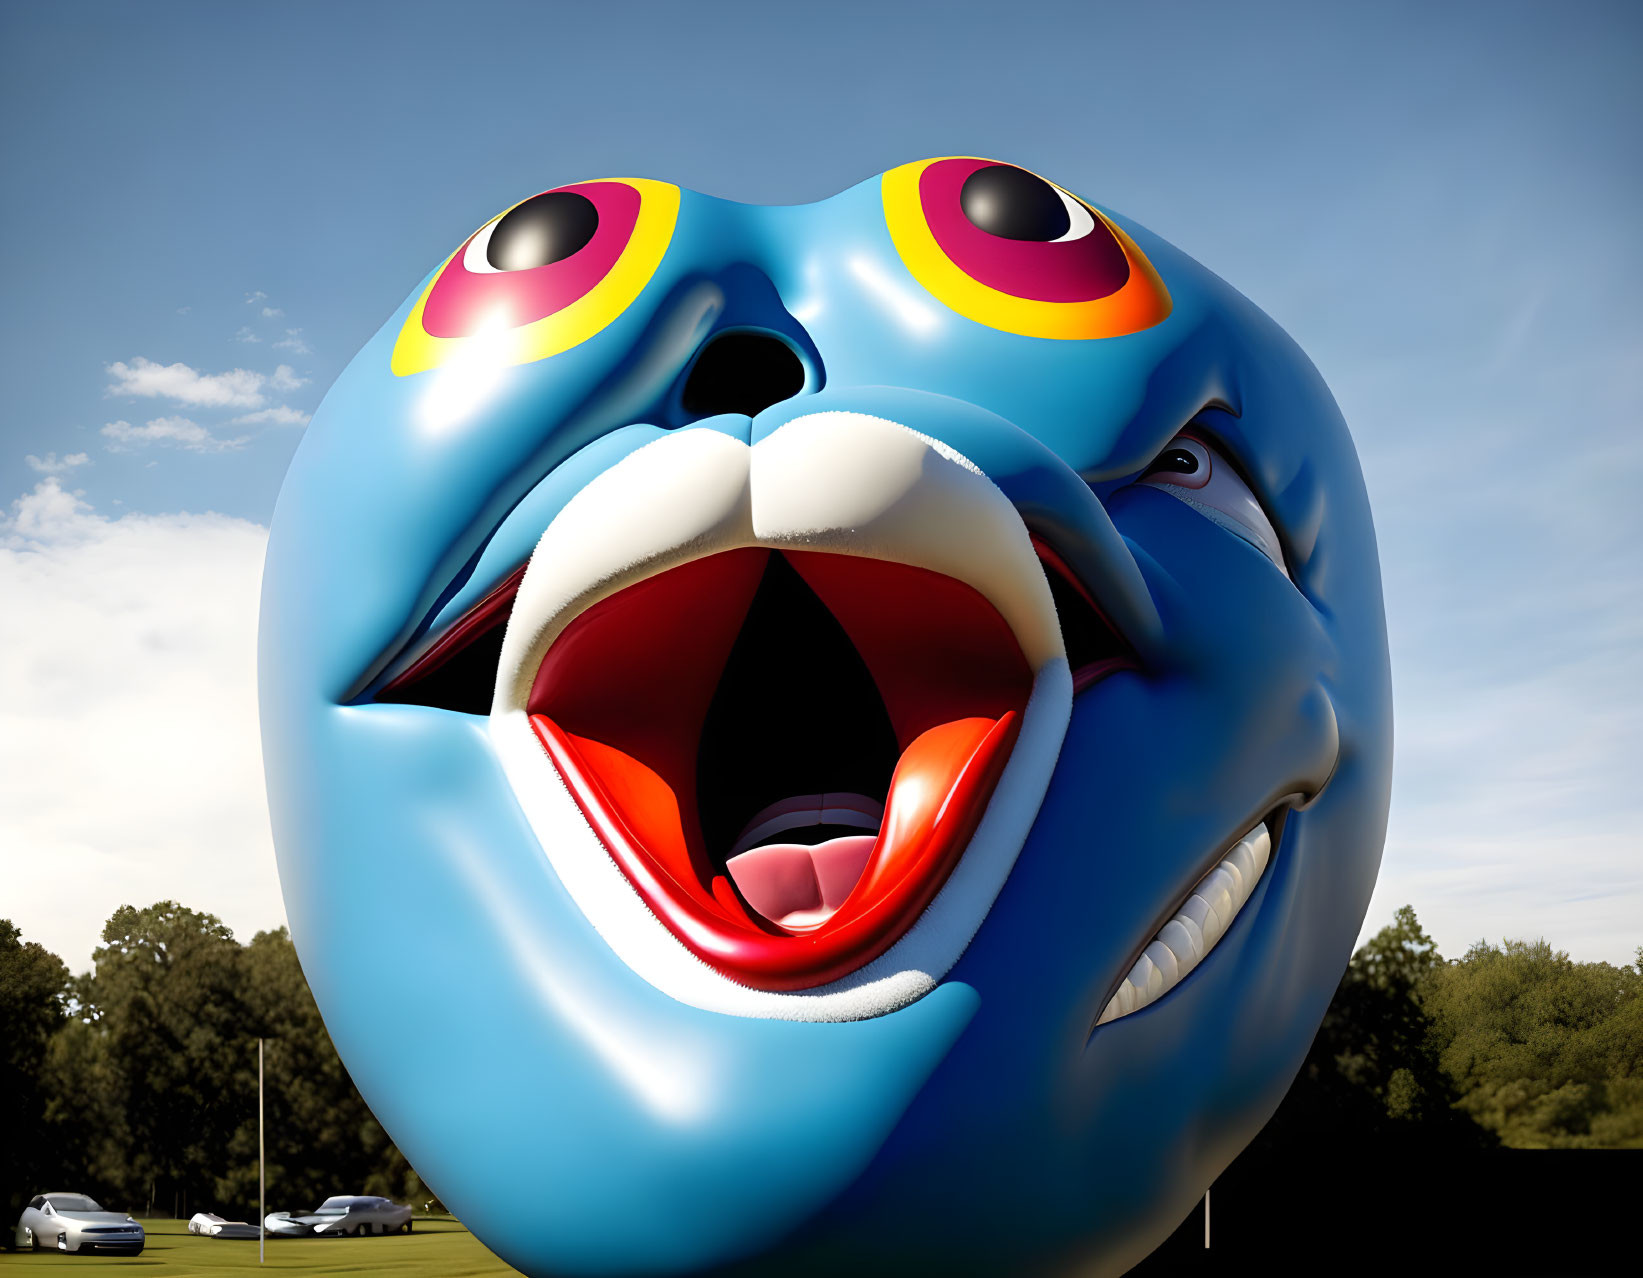 Giant inflated head with cartoonish features in surreal setting